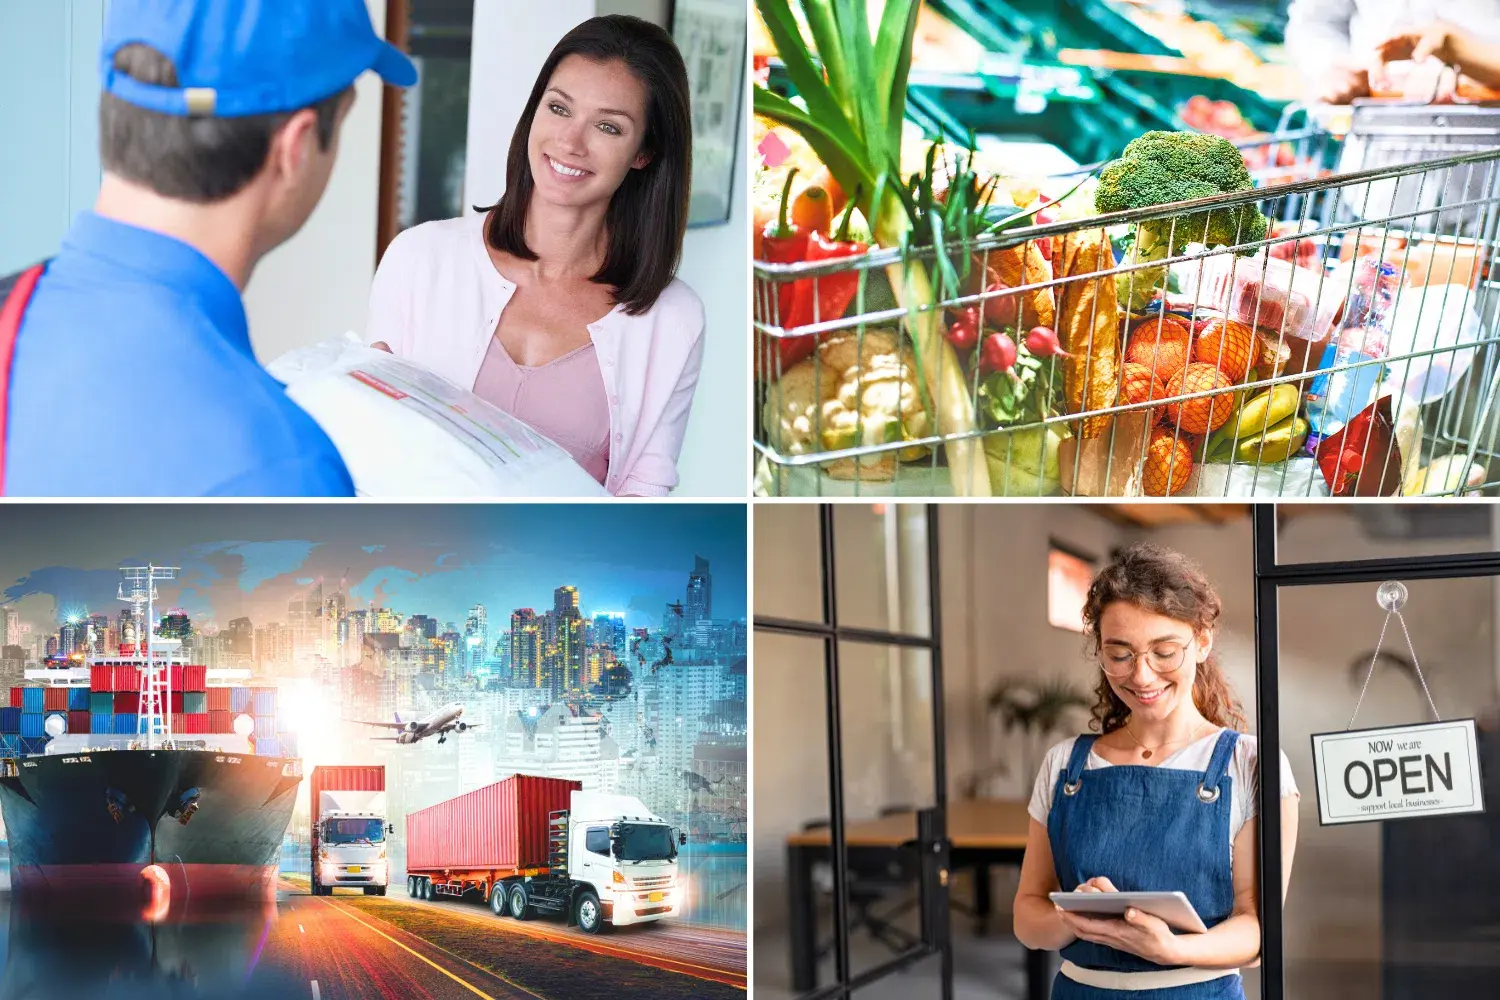 Images of 1. a package being delivered 2. customer shopping inside a grocery store 3. trucks, shipments, containers, airplanes 4. small business owner working on her tablet